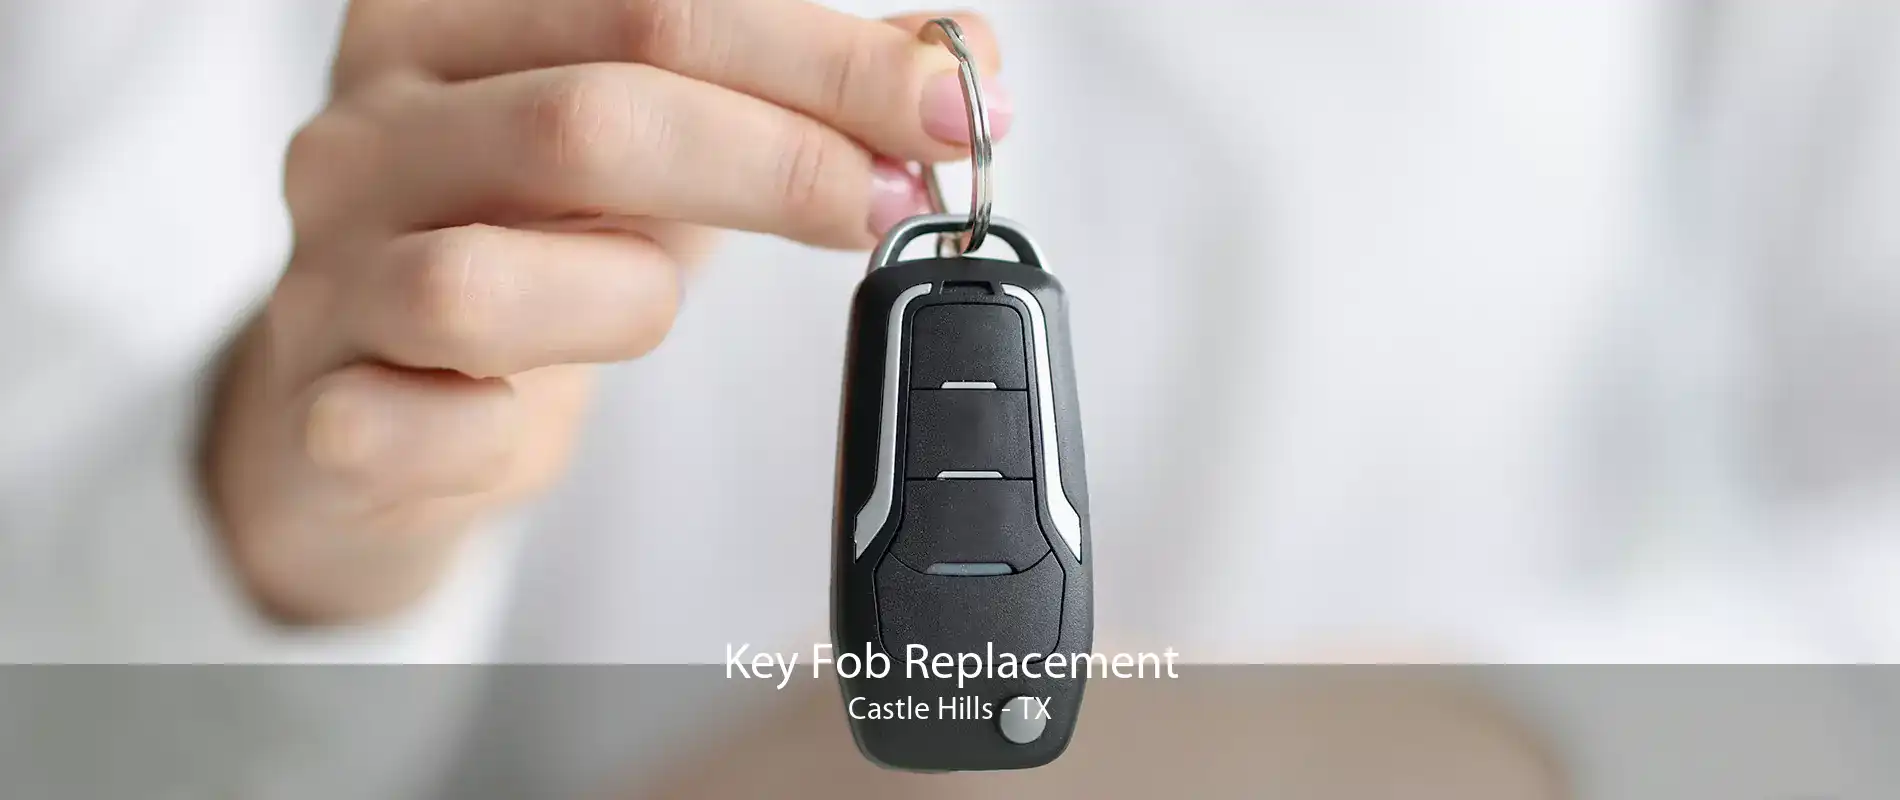 Key Fob Replacement Castle Hills - TX